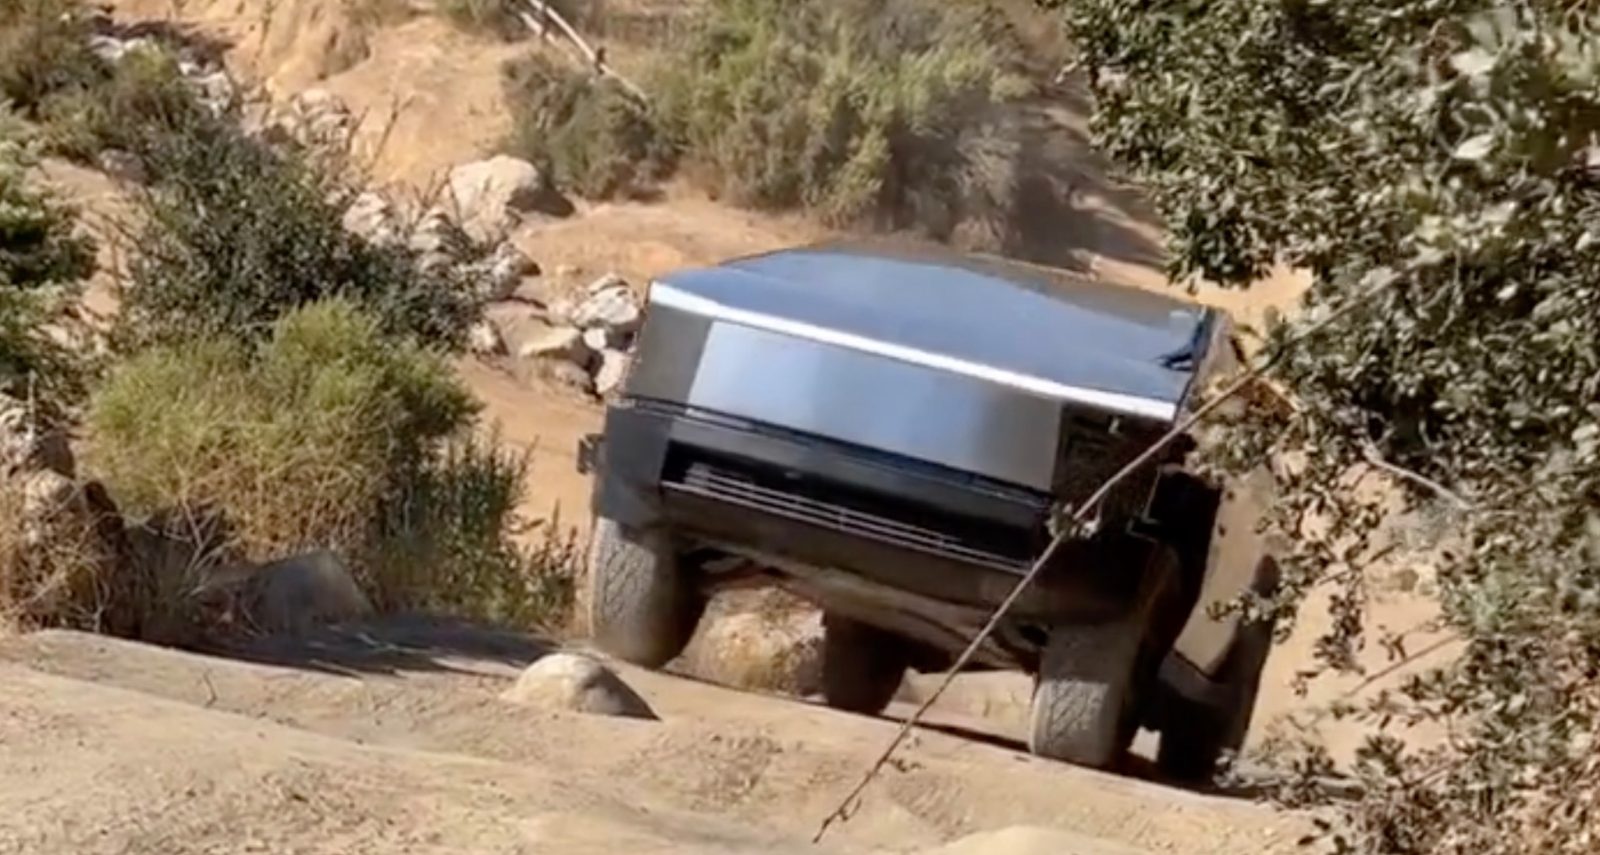 tesla cybertruck spotted climbing stairs off-road – showing great ground clearance